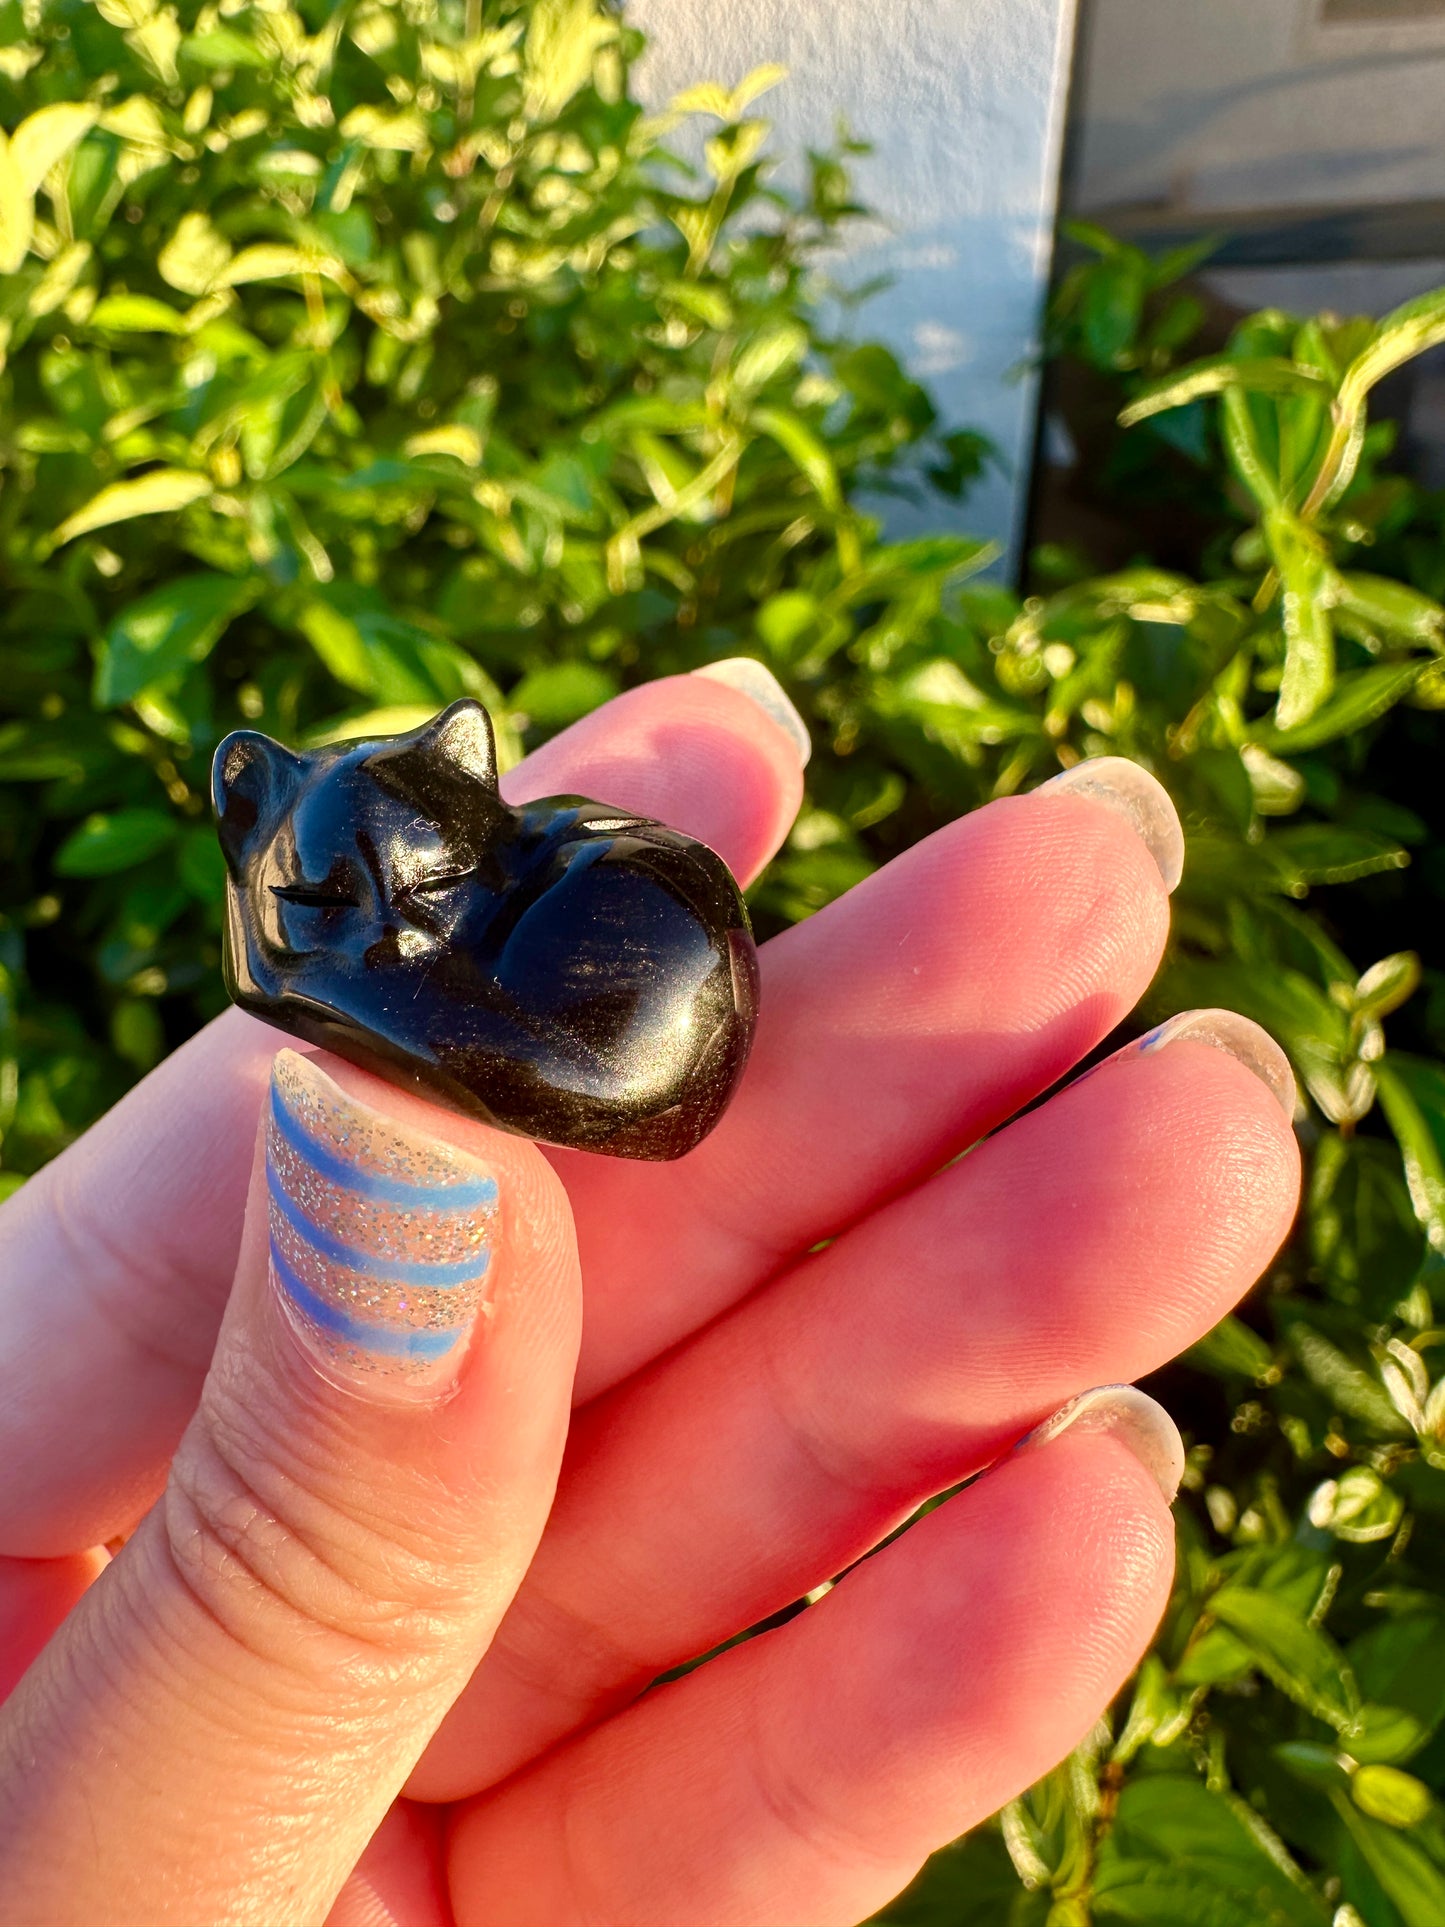 Black Obsidian Sleeping Cat Carving - Protective Gemstone Figurine for Home Decor, Spiritual Guardian, and Negative Energy Shield, Ideal for Cat Lovers